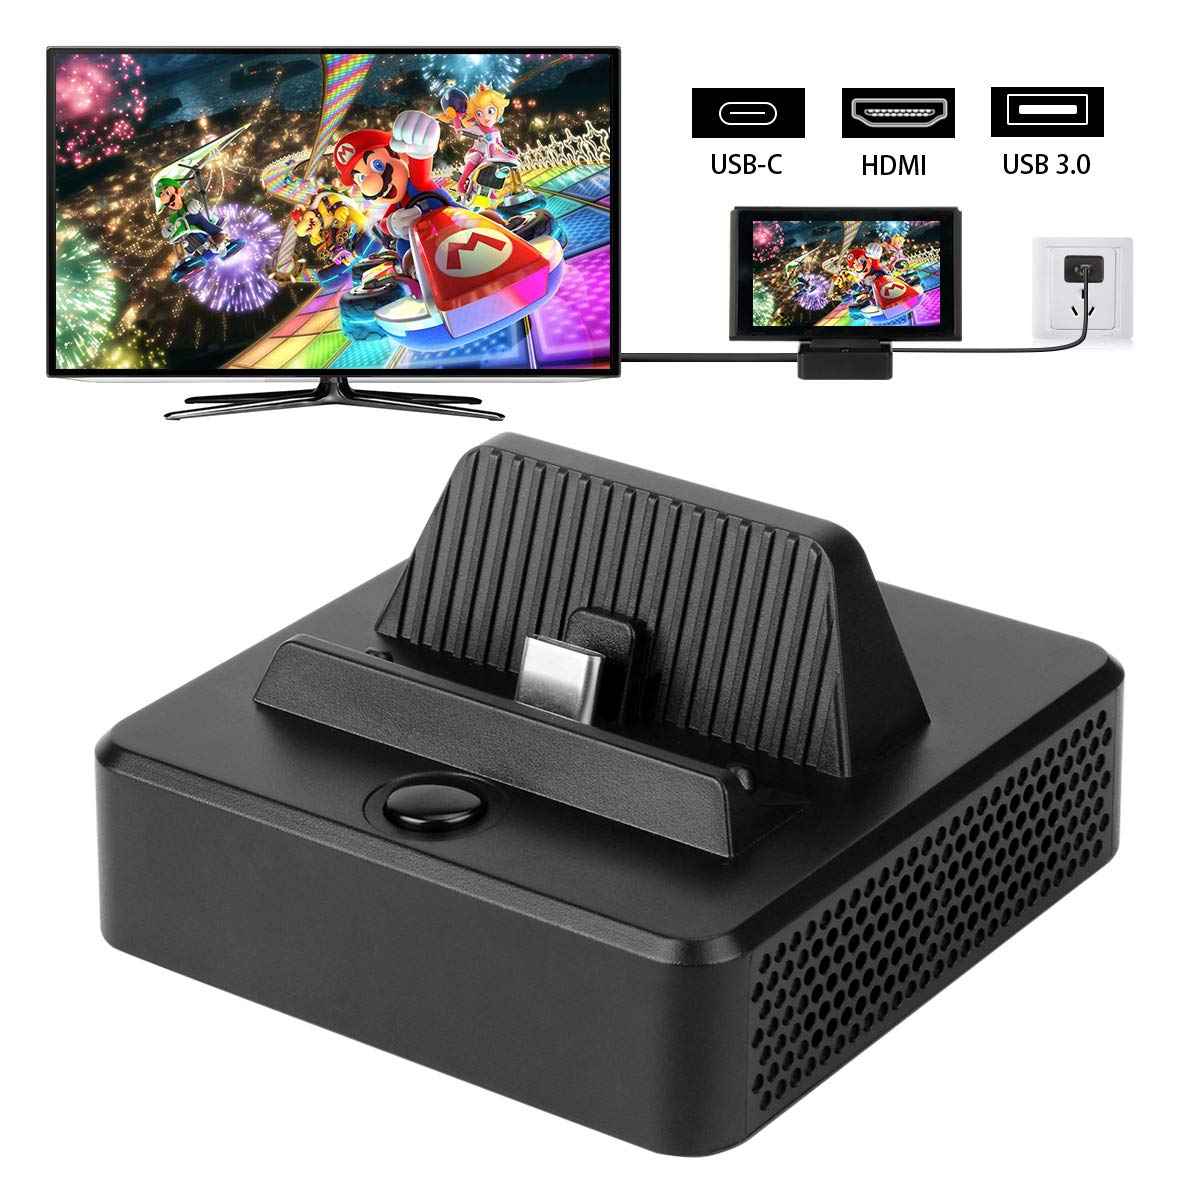 Book Cover Switch Dock, ERNSTING Portable Switch Charging Stand Case, Switch Docking Station with USB Type C Power Input Port, HDMI Video Port Support 4K1080P and USB 3.0 Data Port,for Game Console Conversion